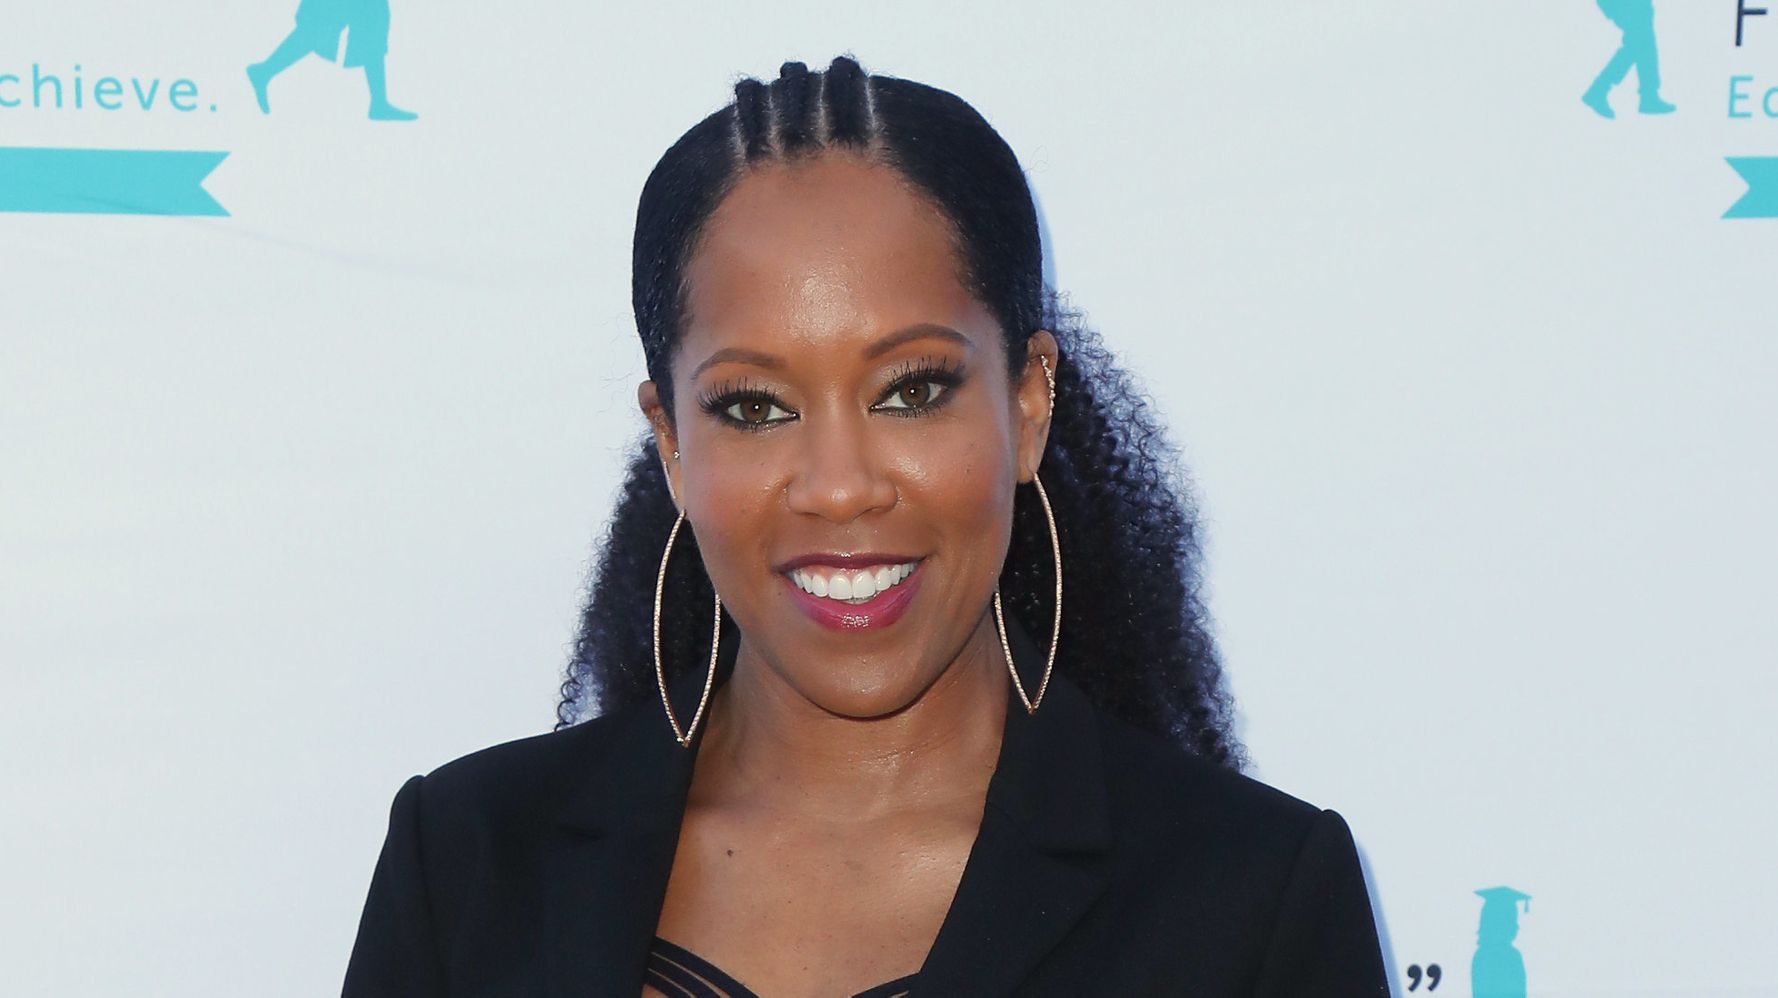 Regina King Directs First Feature Film 'One Night in Miami'